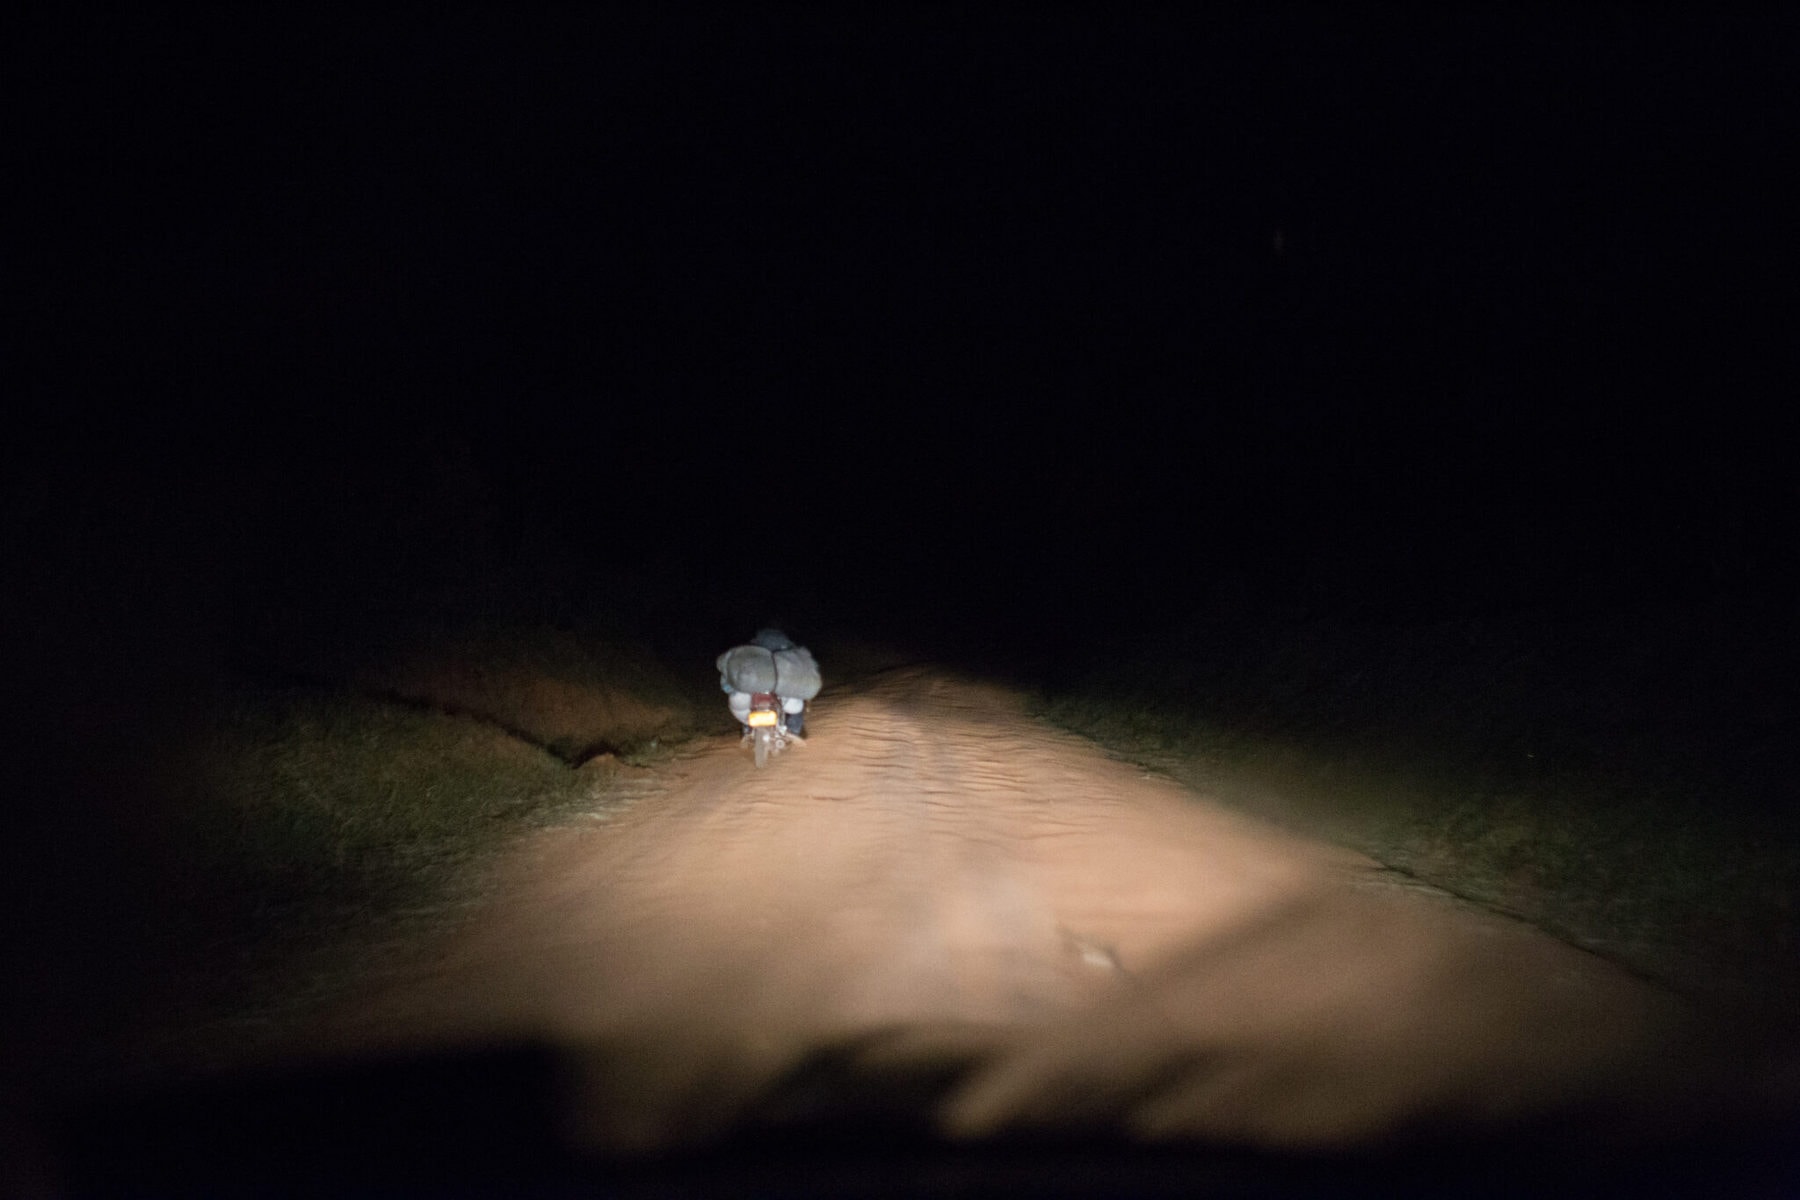 Ugandan roads in the dark, only dust, unlit vehicles and potholes